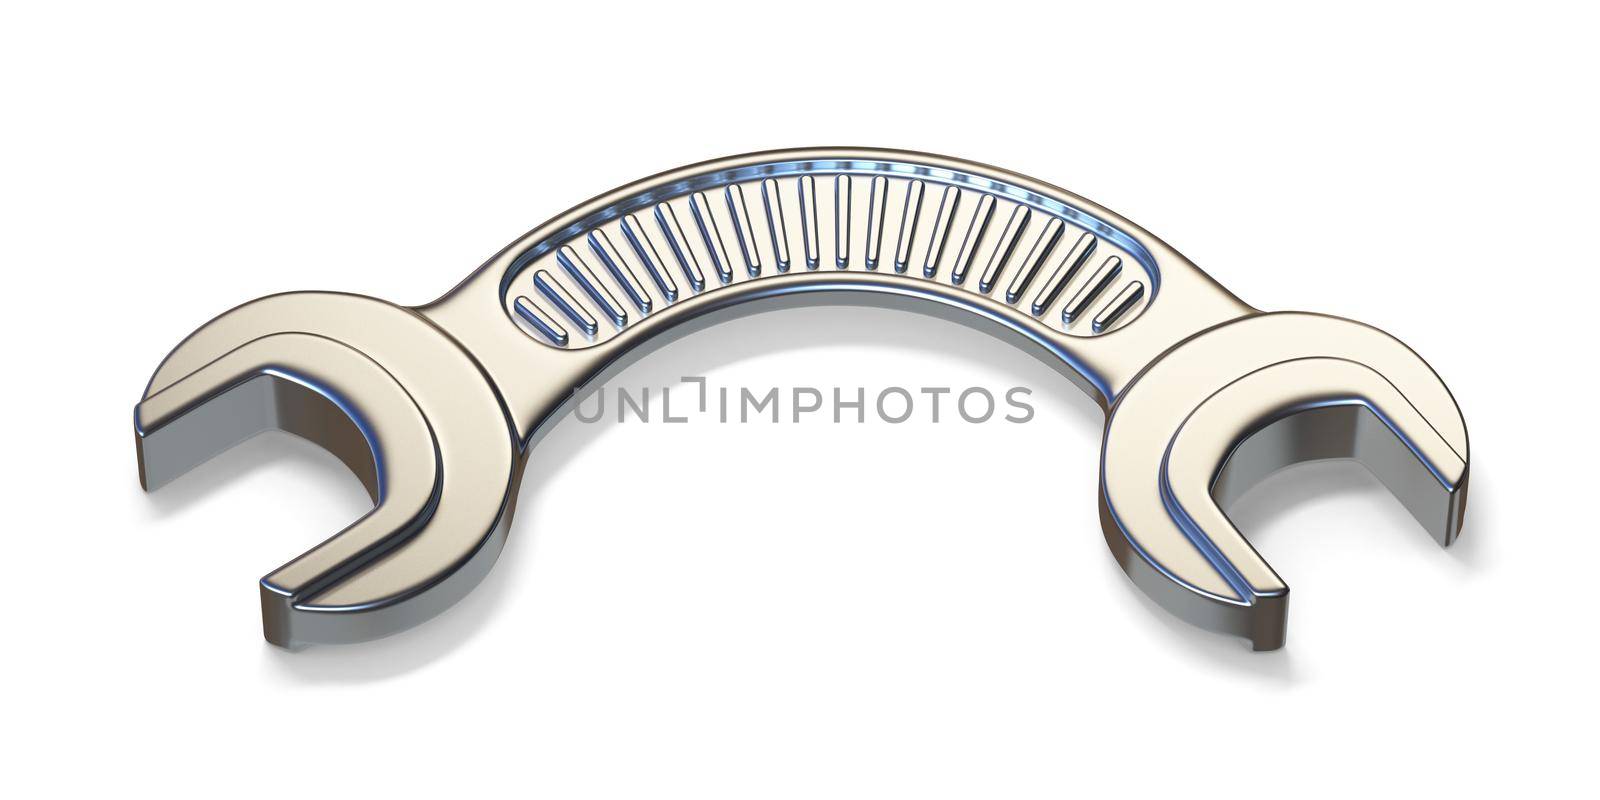 Bent wrench 3D render illustration isolated on white background